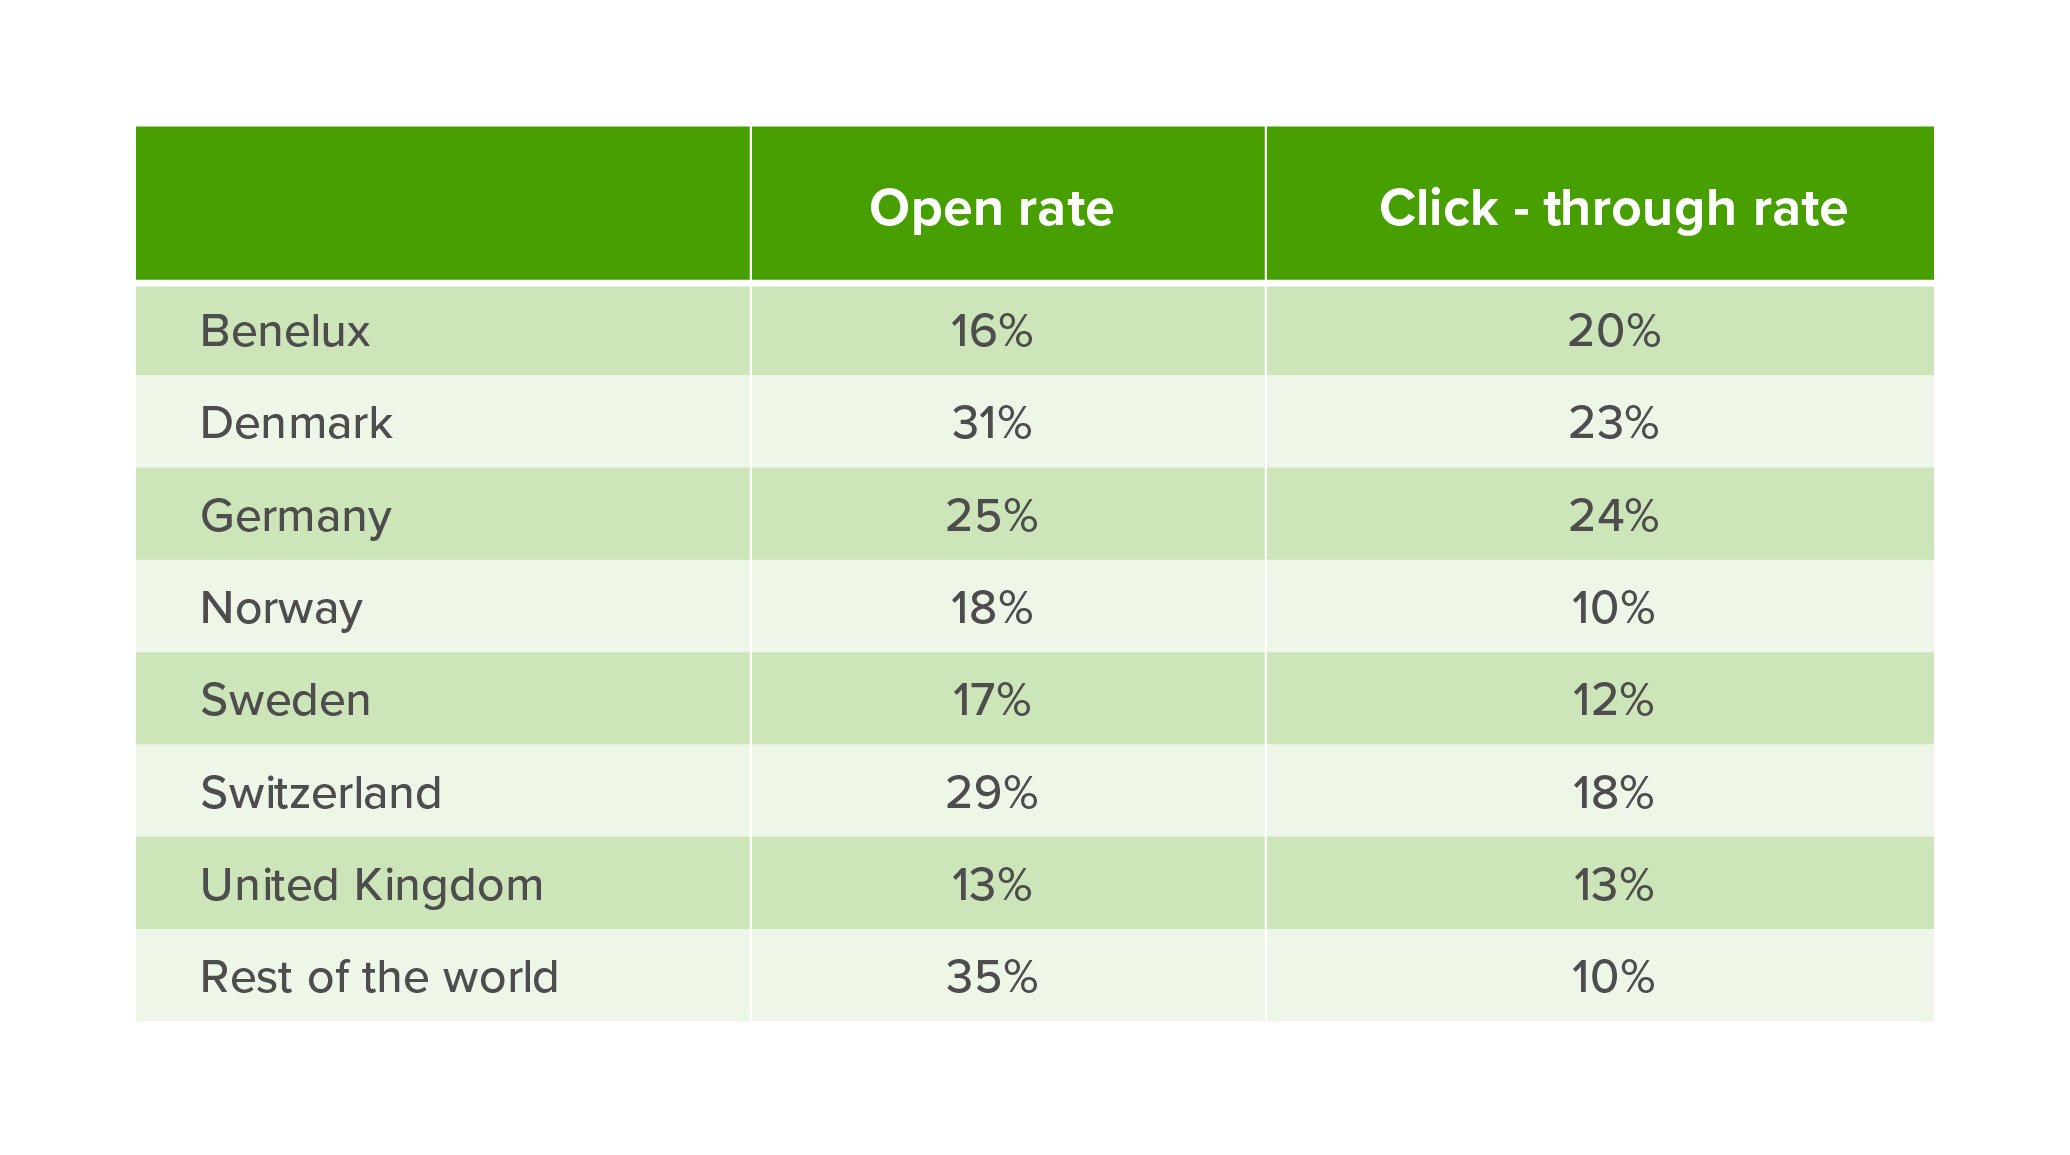 SuperOffice open rate and clickthrough rate by country